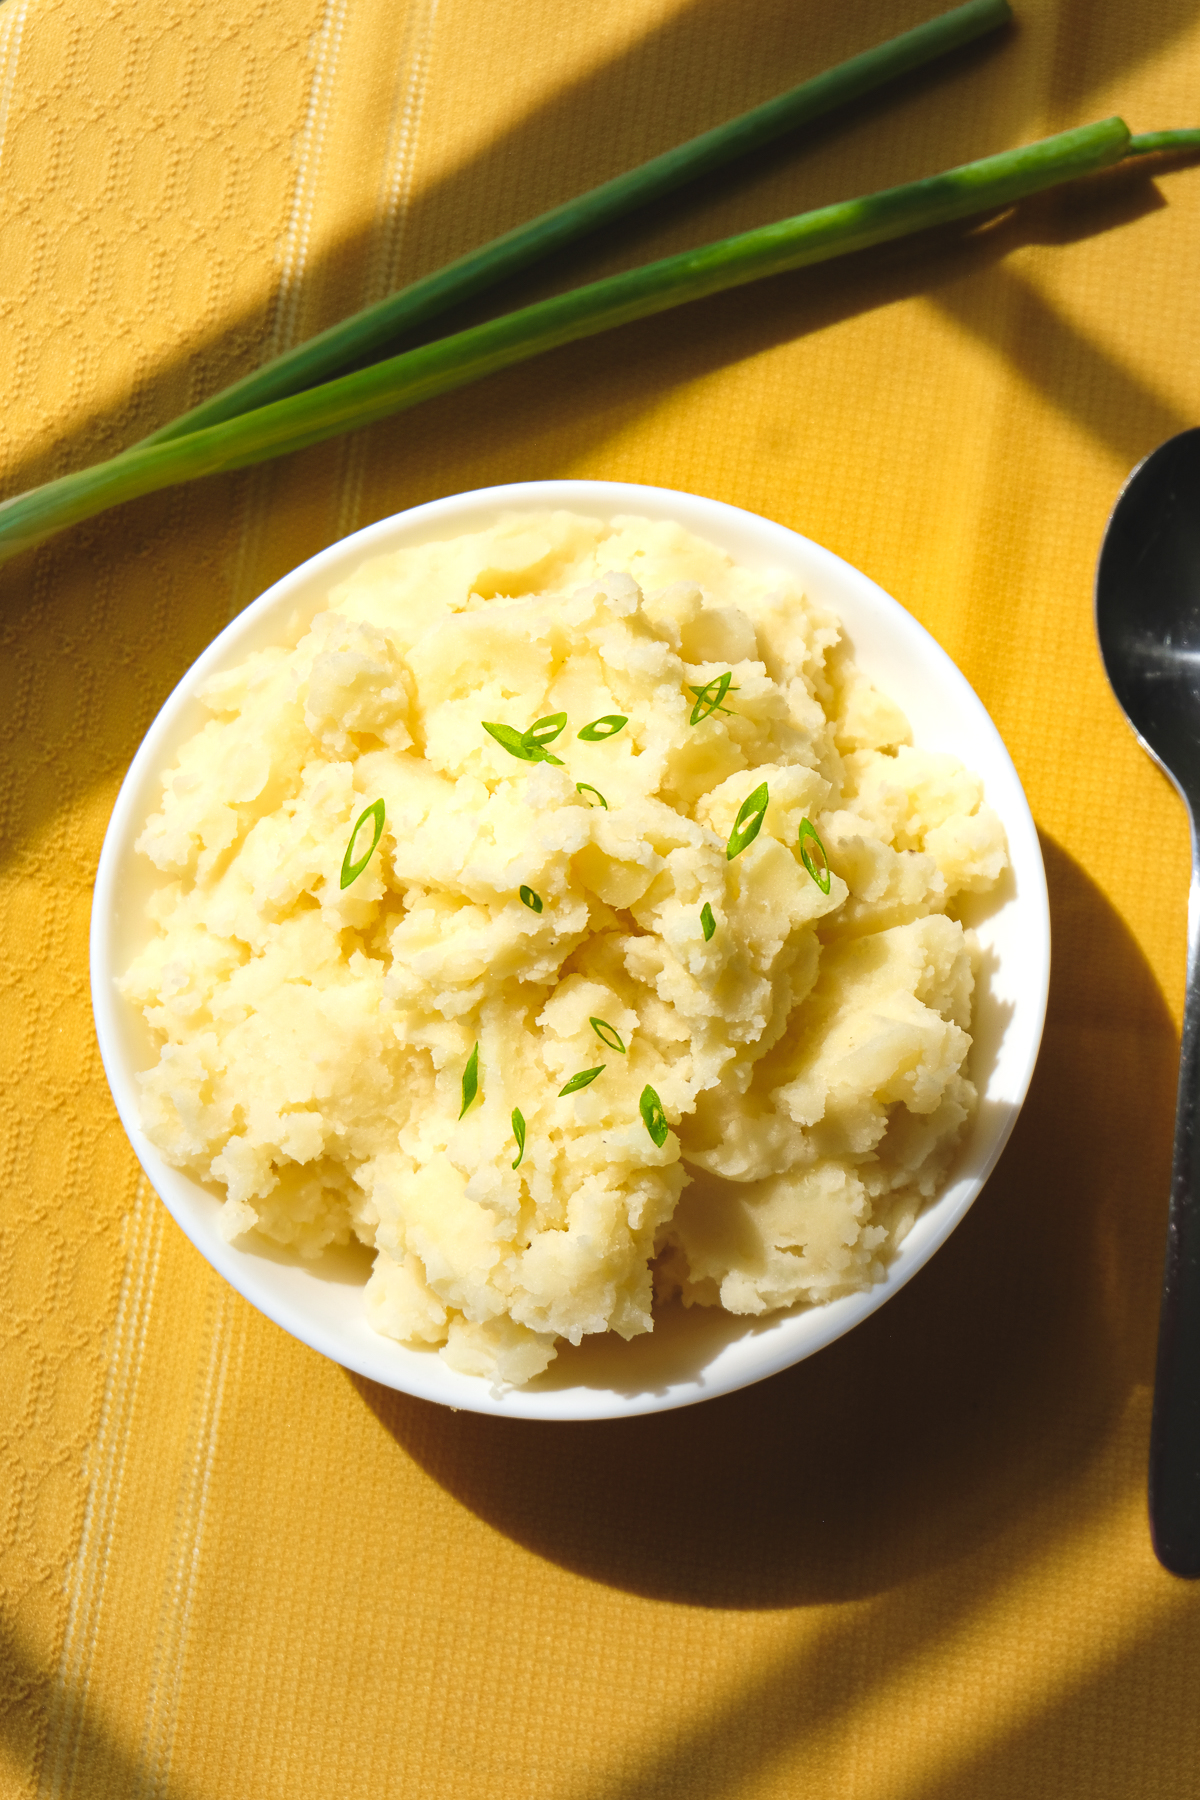 Vegan Mashed Potatoes in a bowl on a yellow cloth with green onions.